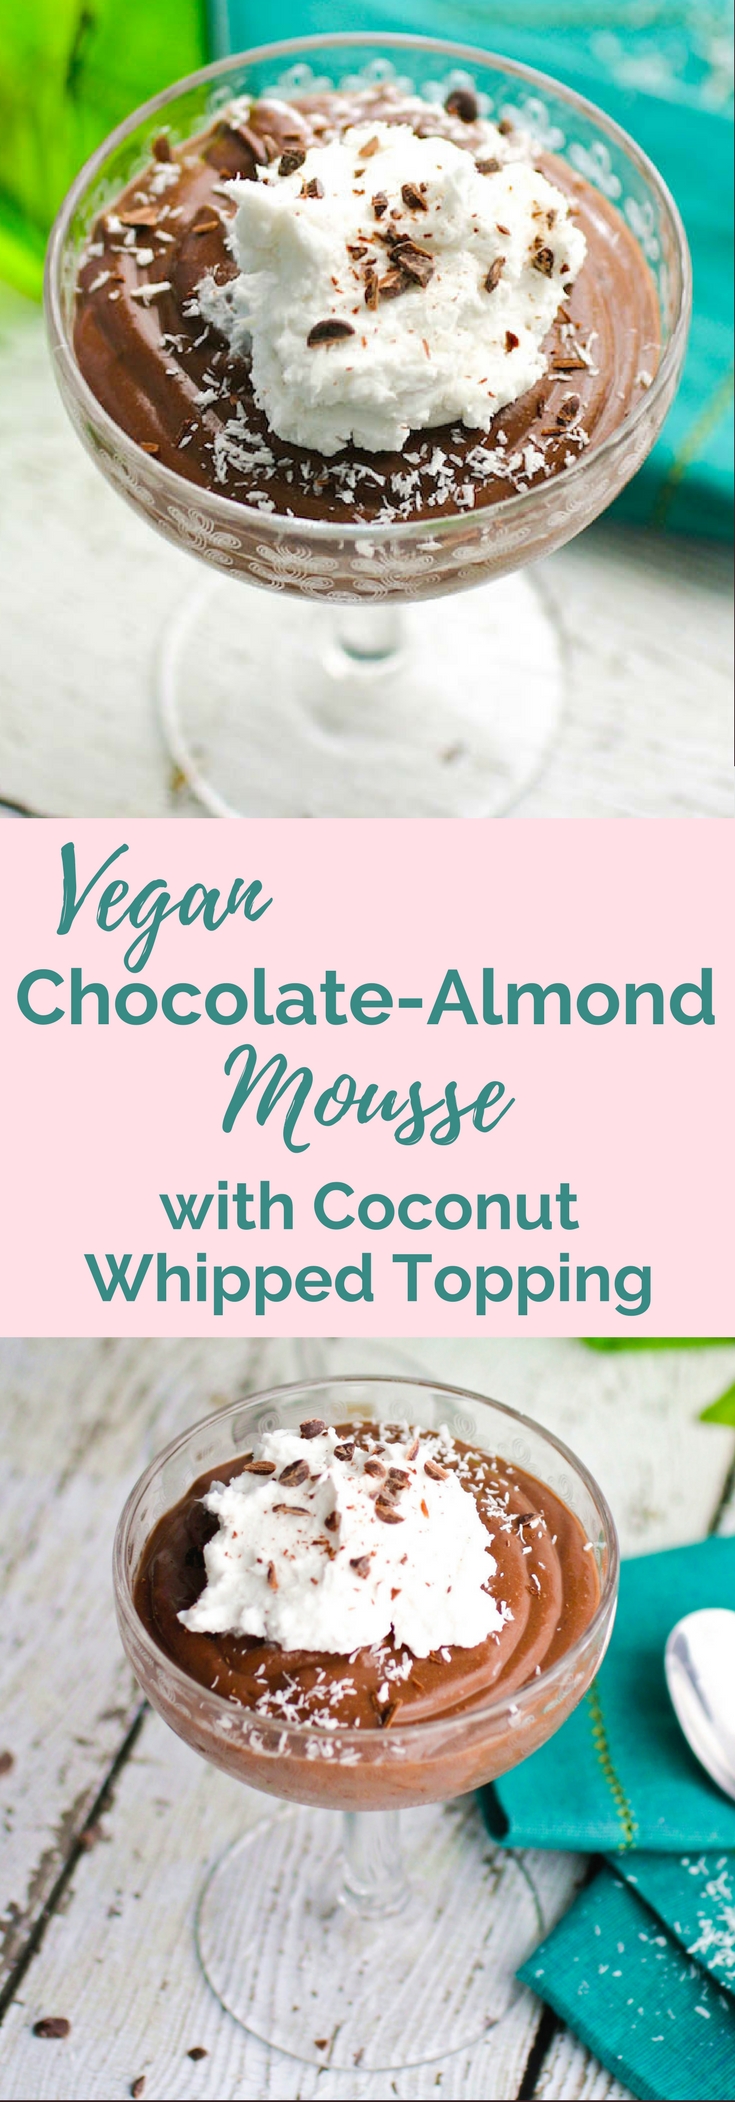 Vegan Chocolate Mousse with Coconut Whipped Topping is delightful dessert. You'll love this vegan chocolate mousse for a delightful treat!